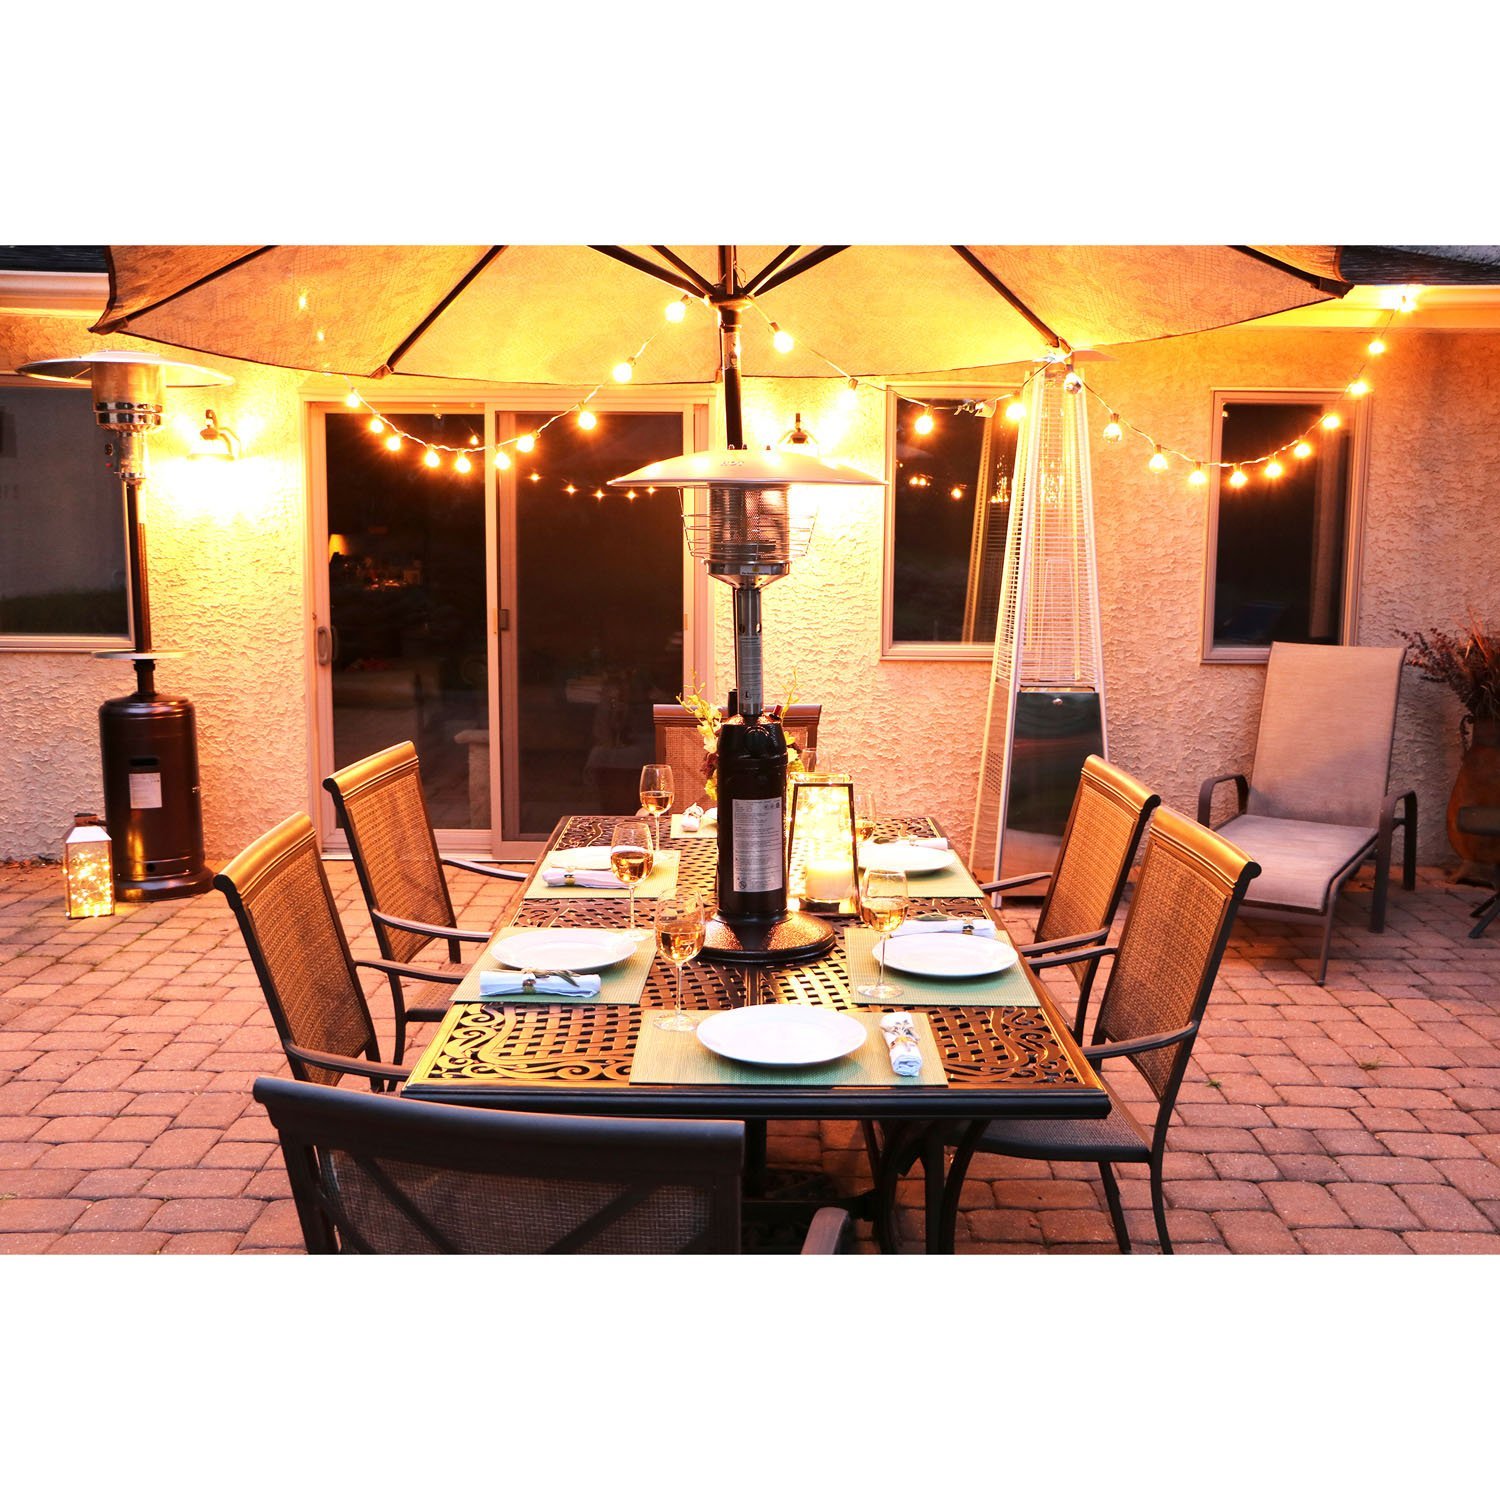 Today only: Save over $100 on Hanover fire pits and patio heaters